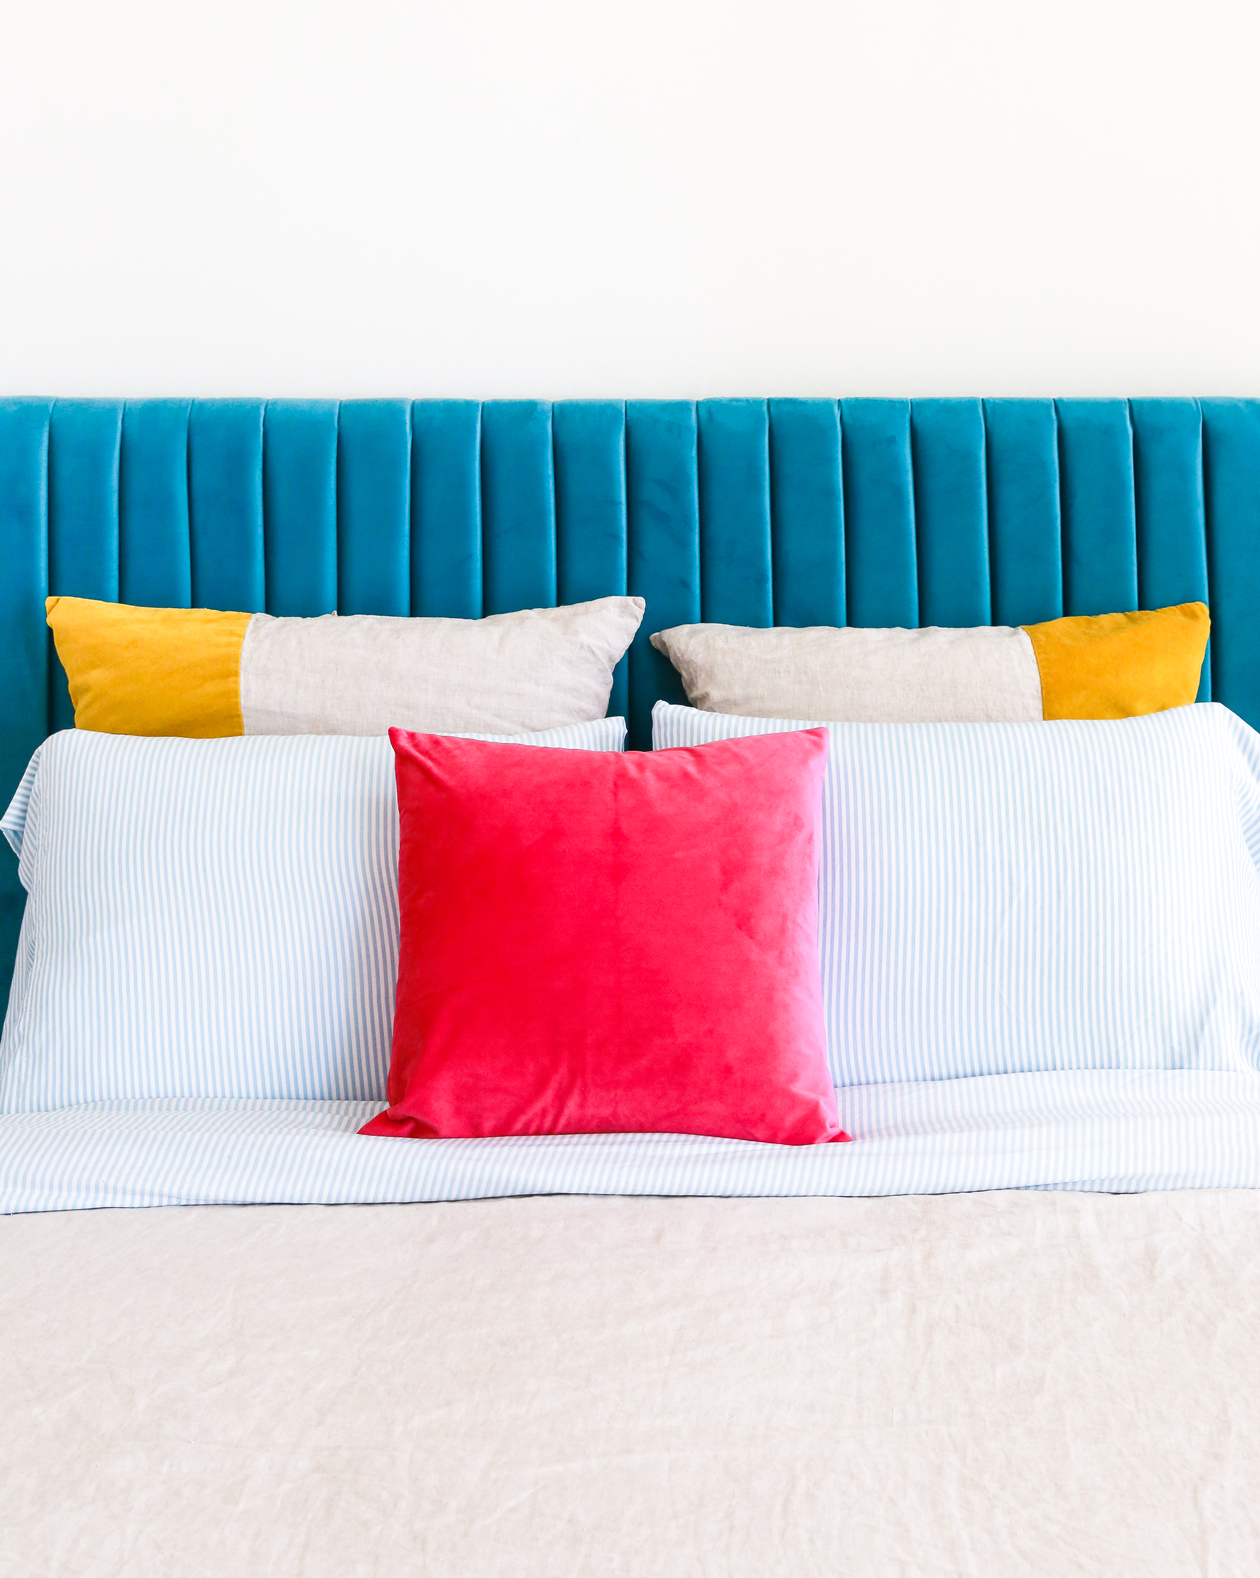 5 Ways to Add Color to Any Bedroom